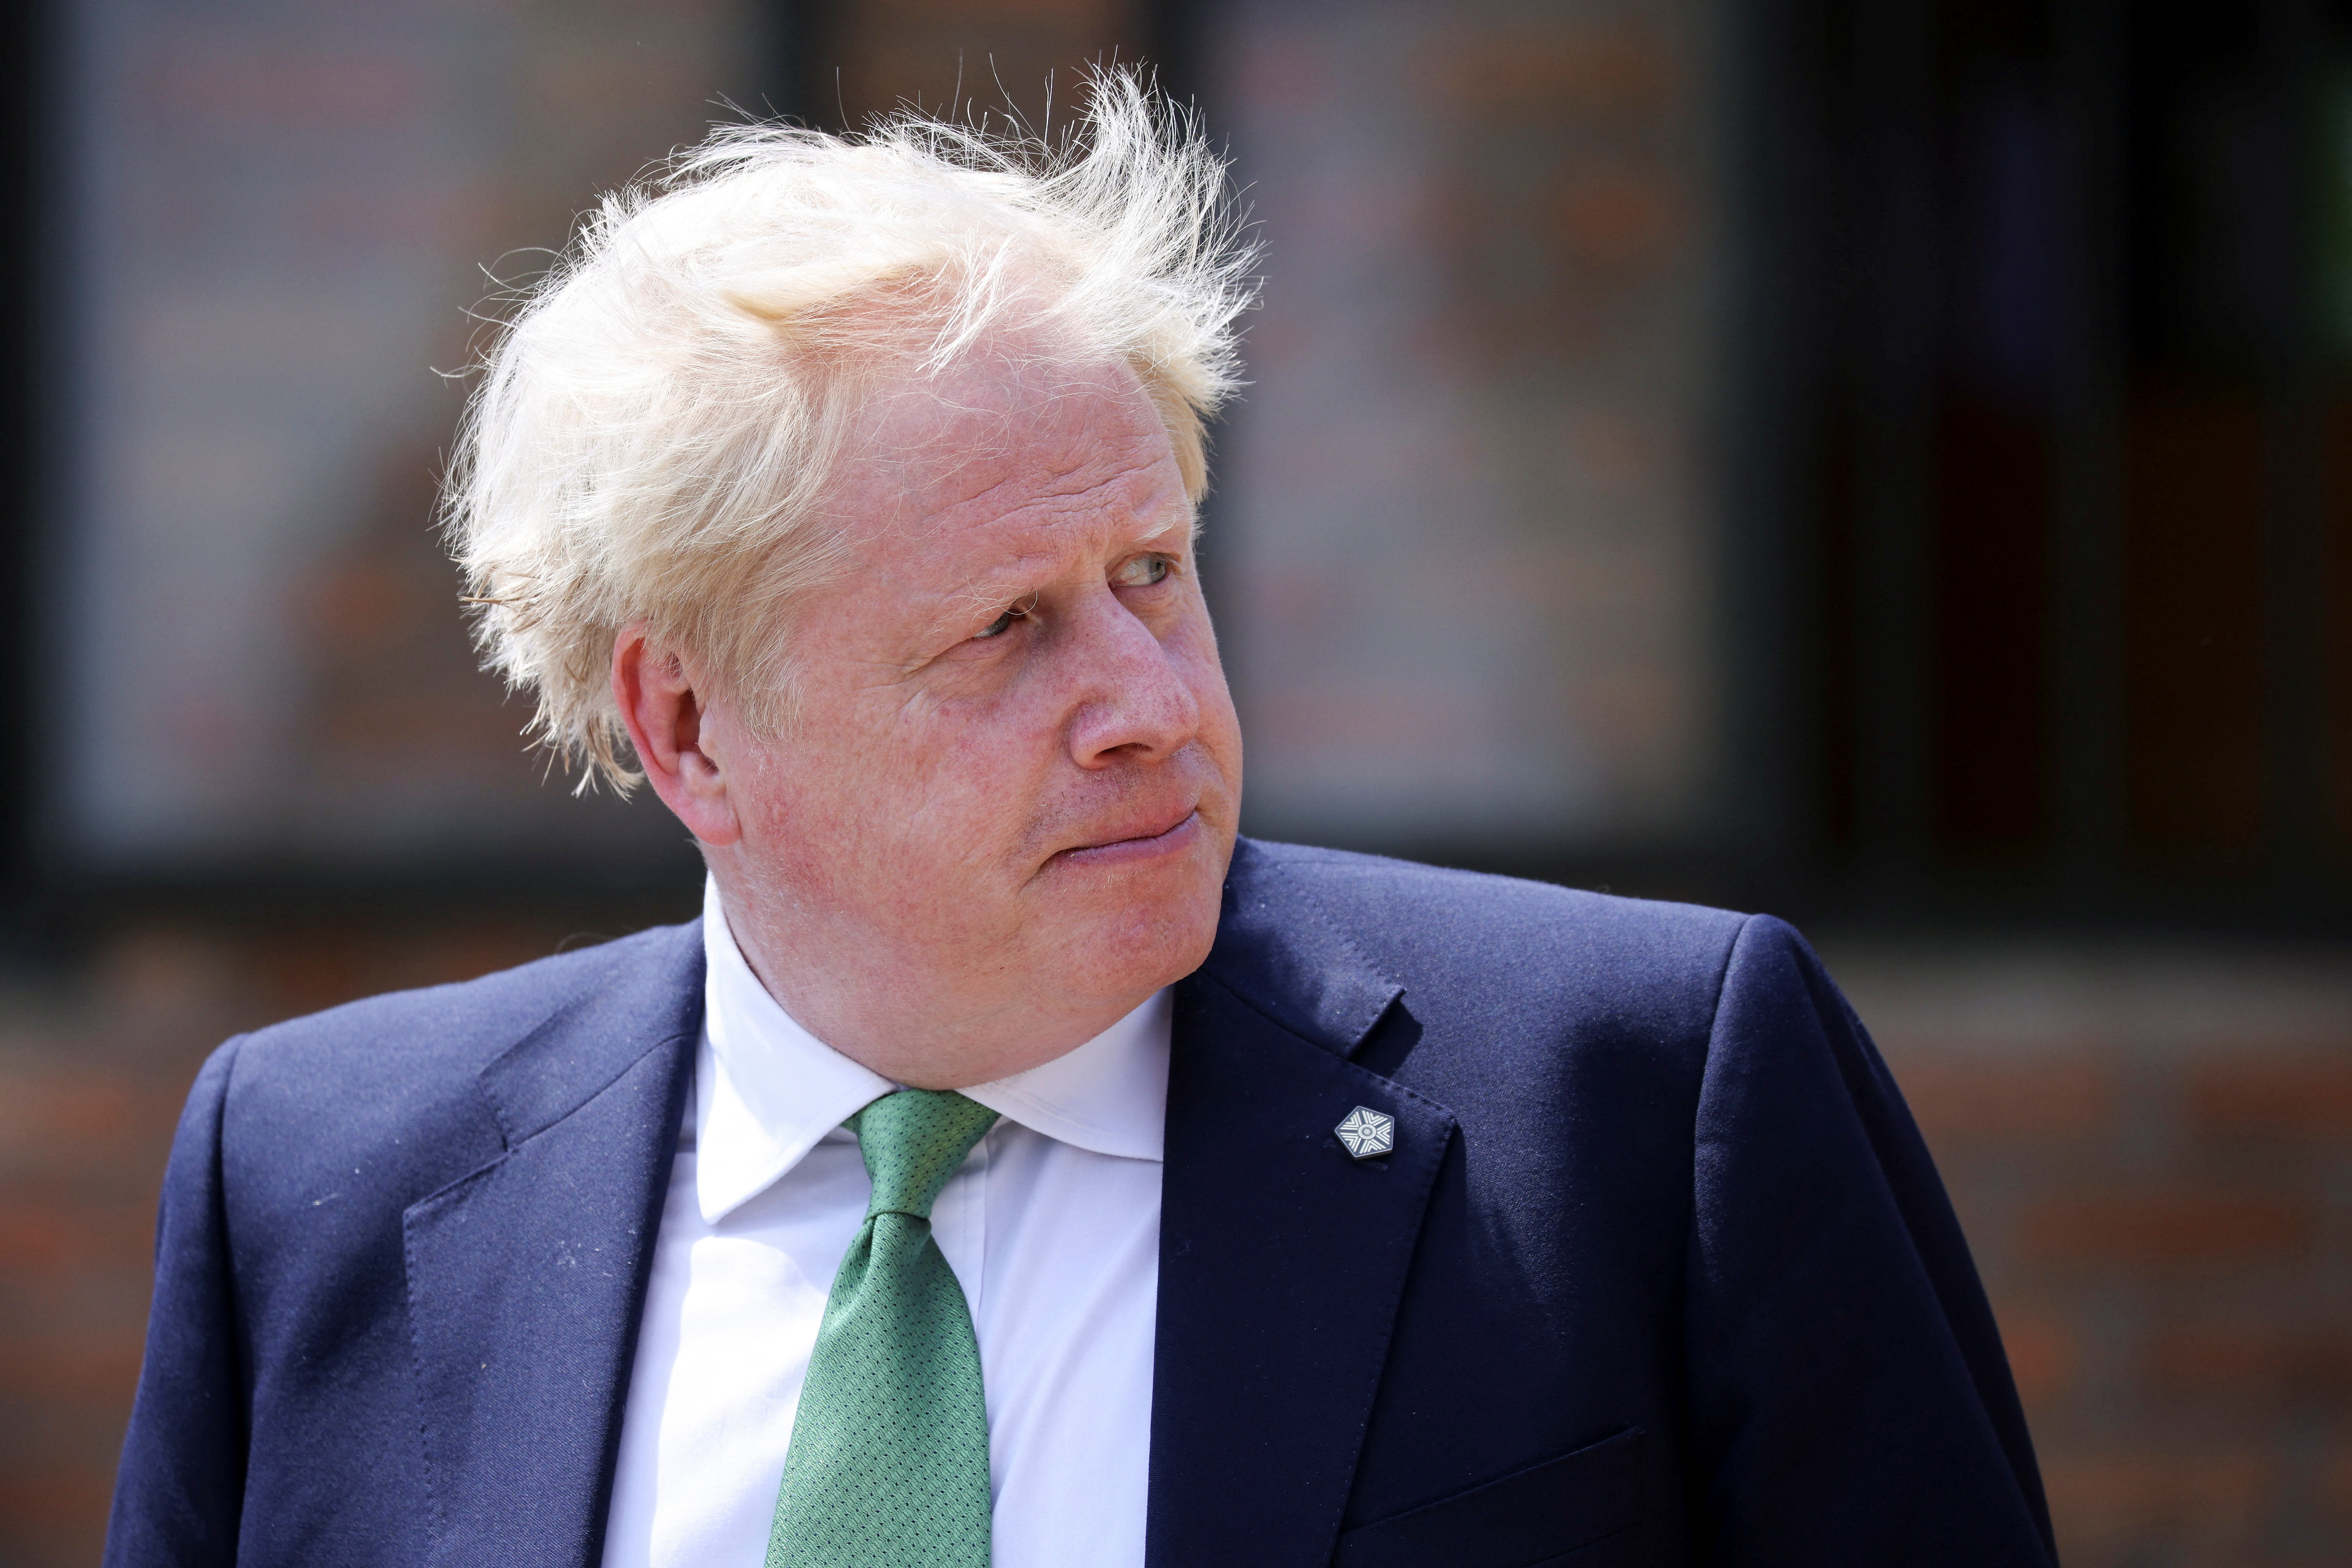 British Prime Minister Boris Johnson looks on during a visit to the GS Kacyiru II school on the sidelines of the Commonwealth Heads of Government Meeting (CHOGM) in Kigali, Rwanda June 23, 2022. Dan Kitwood/Pool via REUTERS